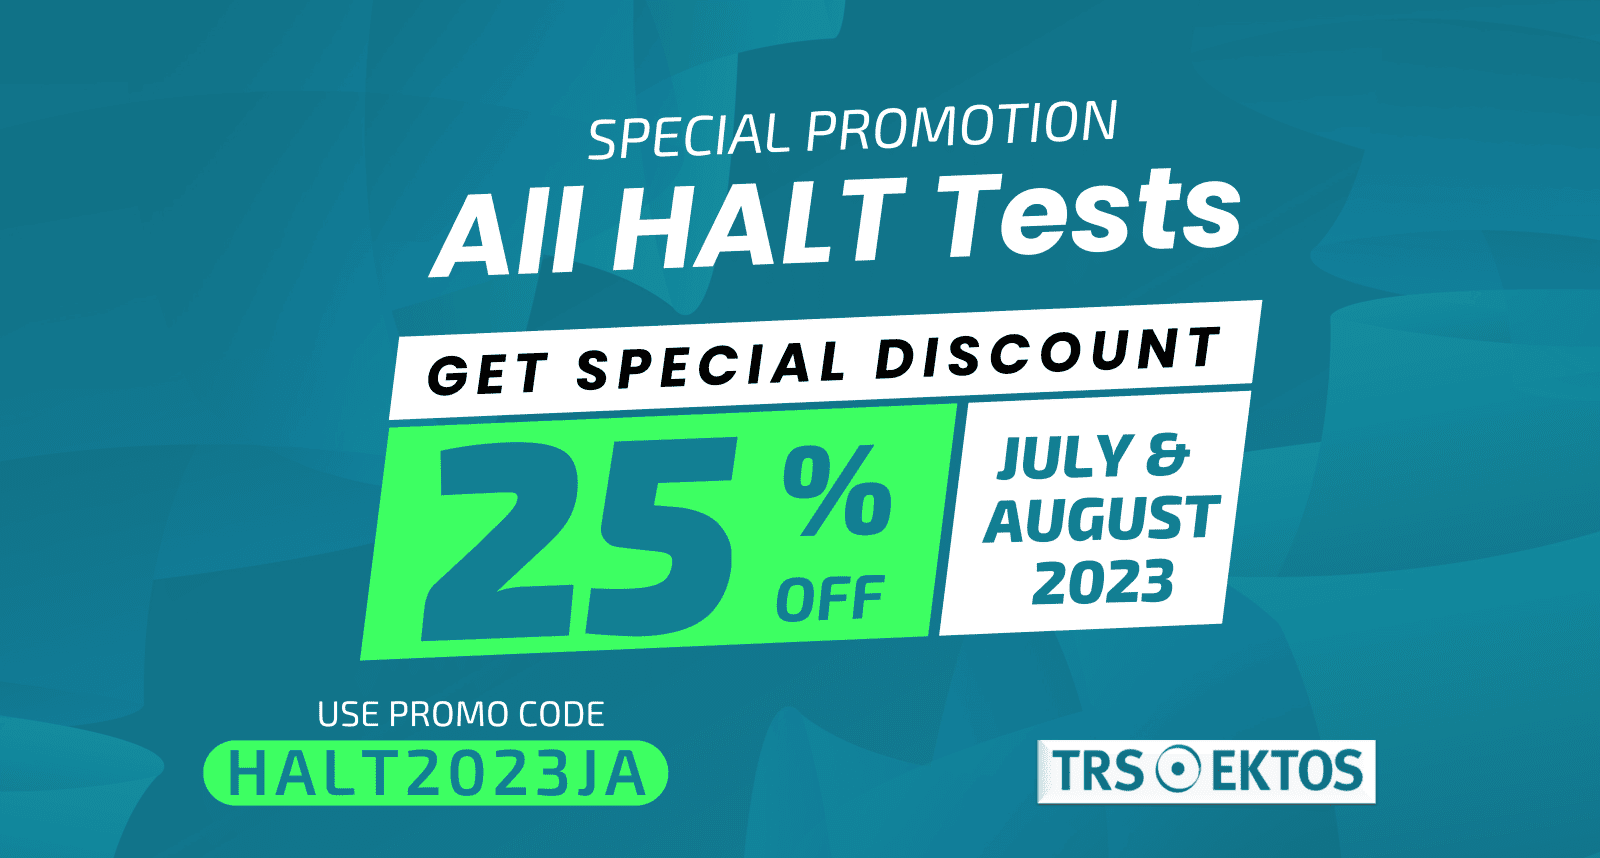 25% DISCOUNT ON ALL HALT Tests in July and August 2023